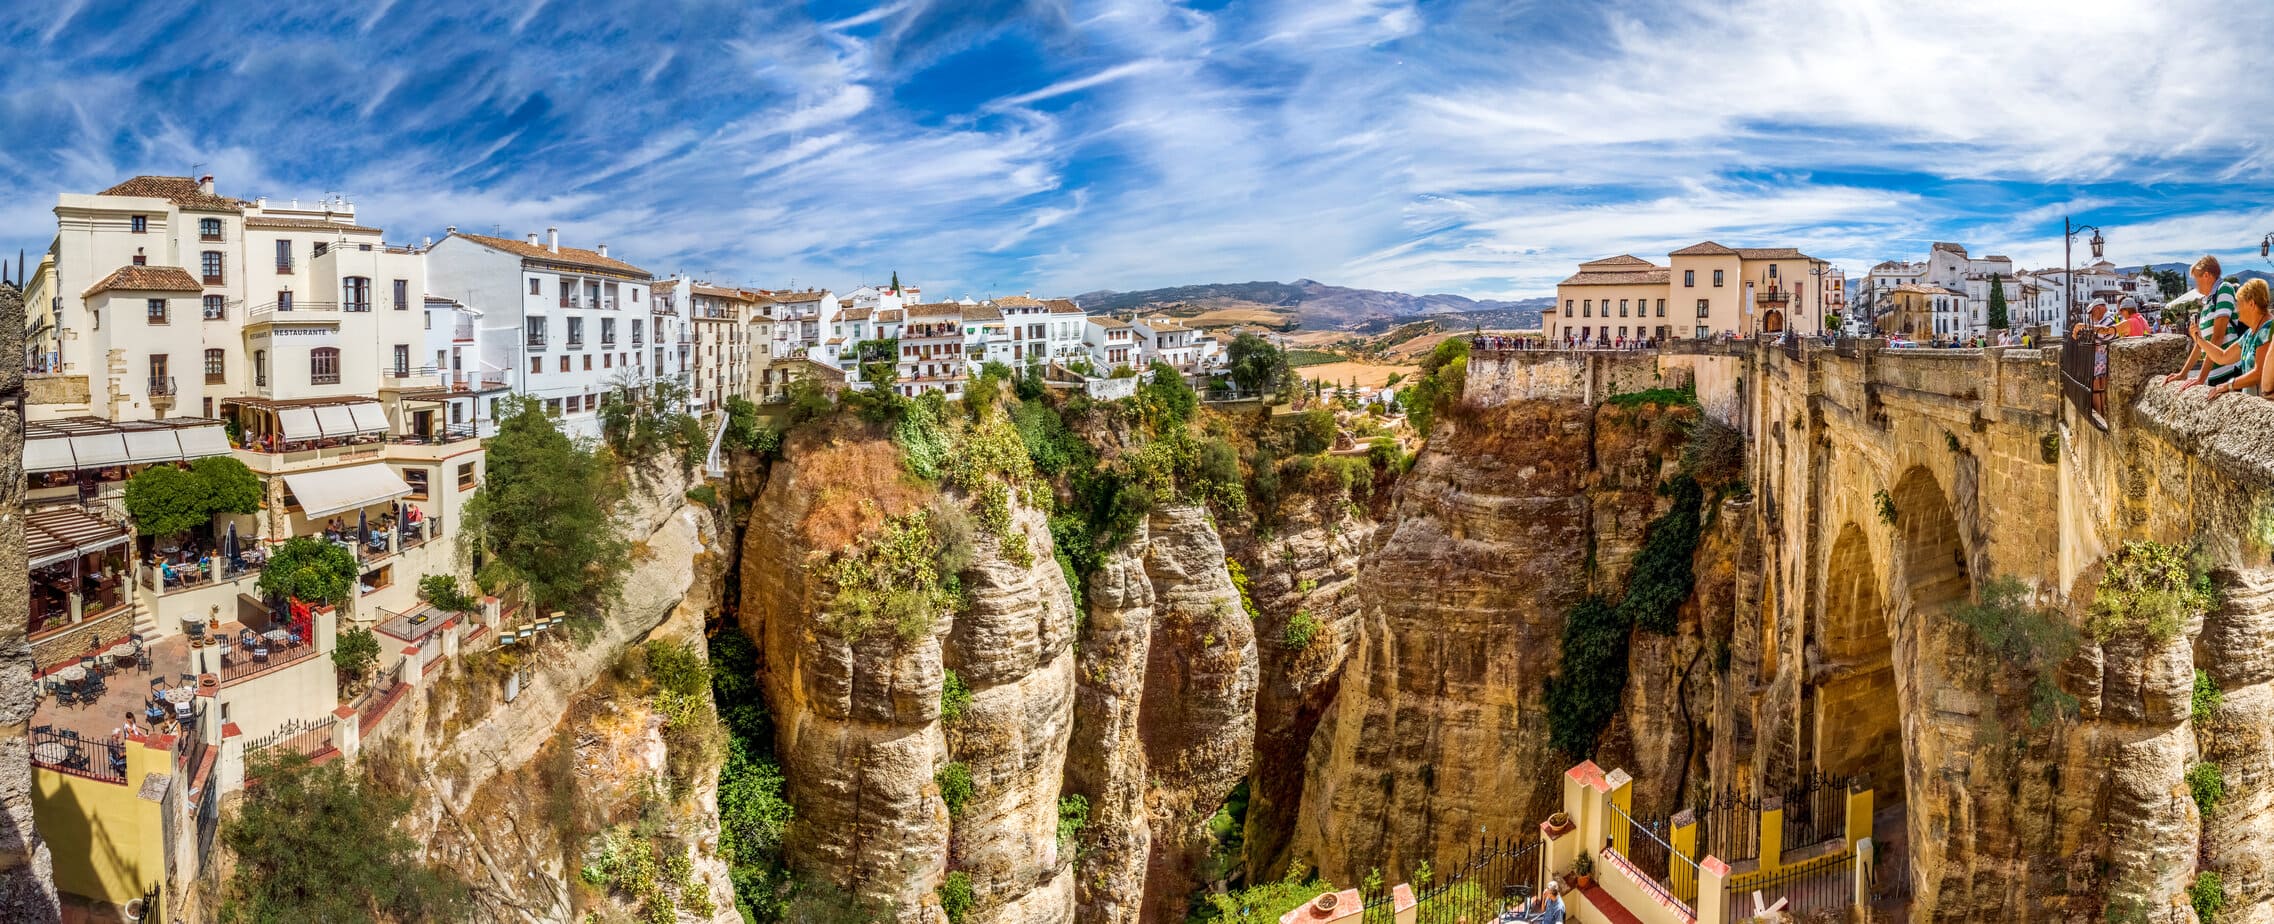 panorama of the Ronda in Andalucia Spain on a very sunny day with blue sky above. the town is on the top of a sheer rock cliff with a stone bridge on the right of the image. best day trips from Malaga. 